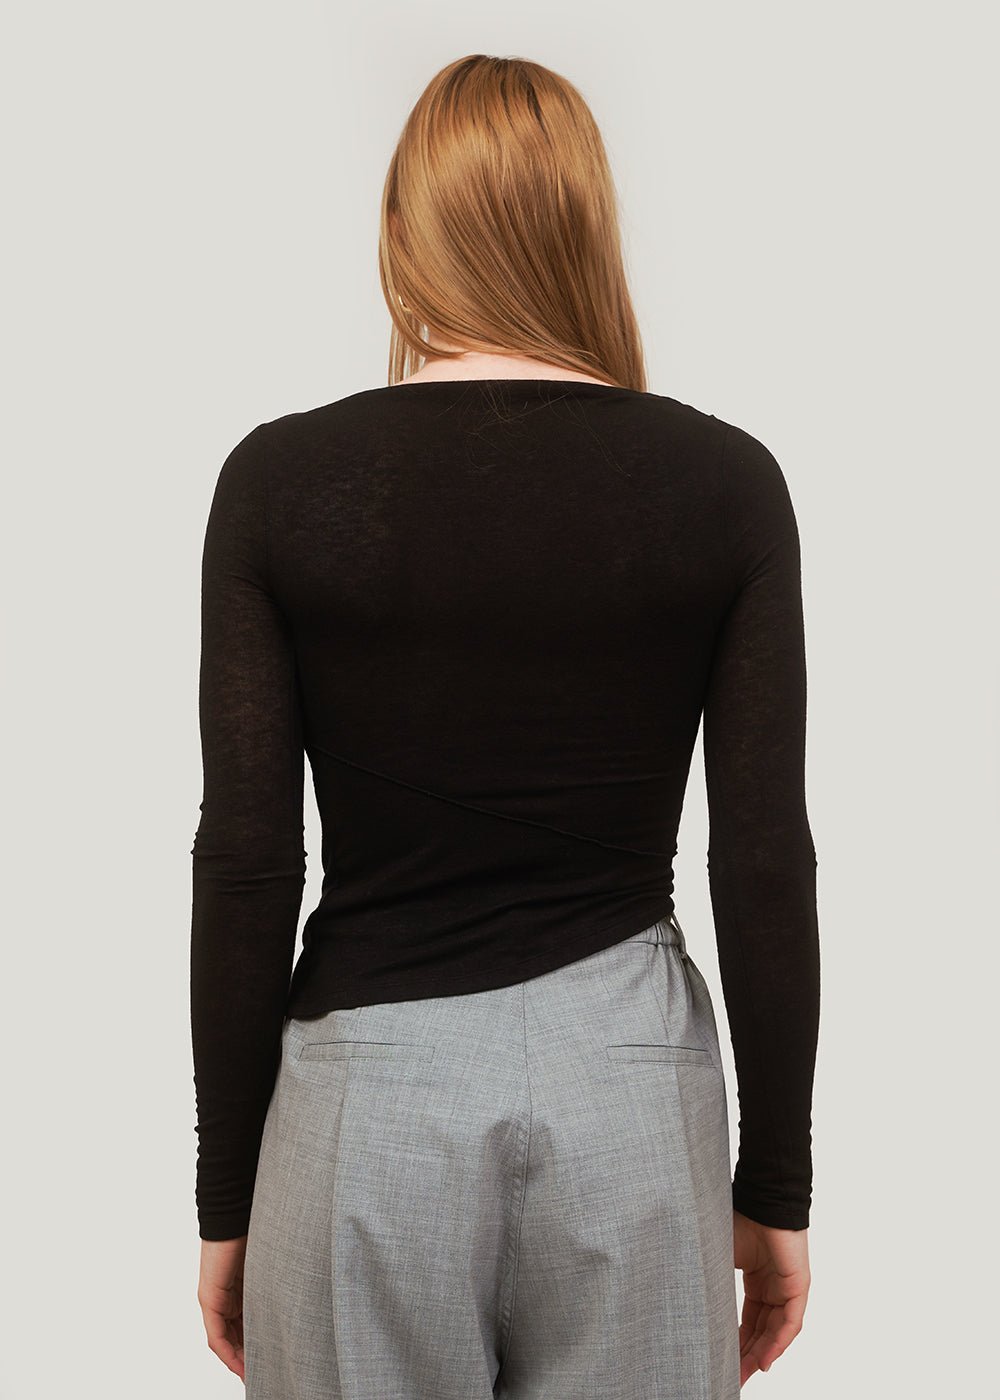 Geel Black Drew Top - New Classics Studios Sustainable Ethical Fashion Canada